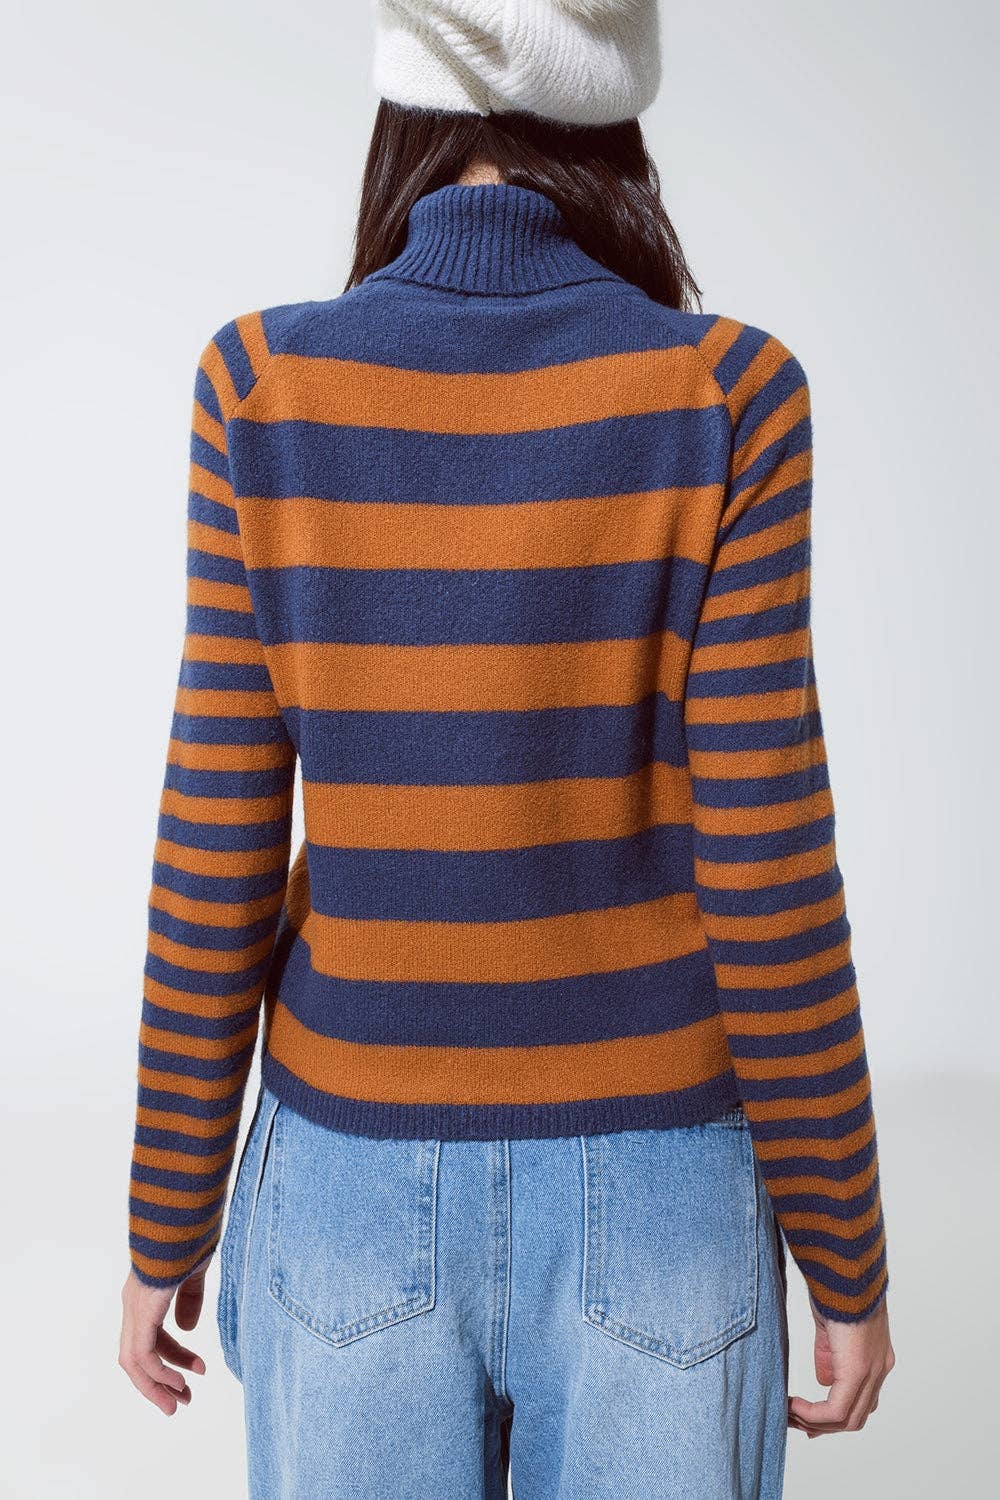 Charlie Striped Sweater